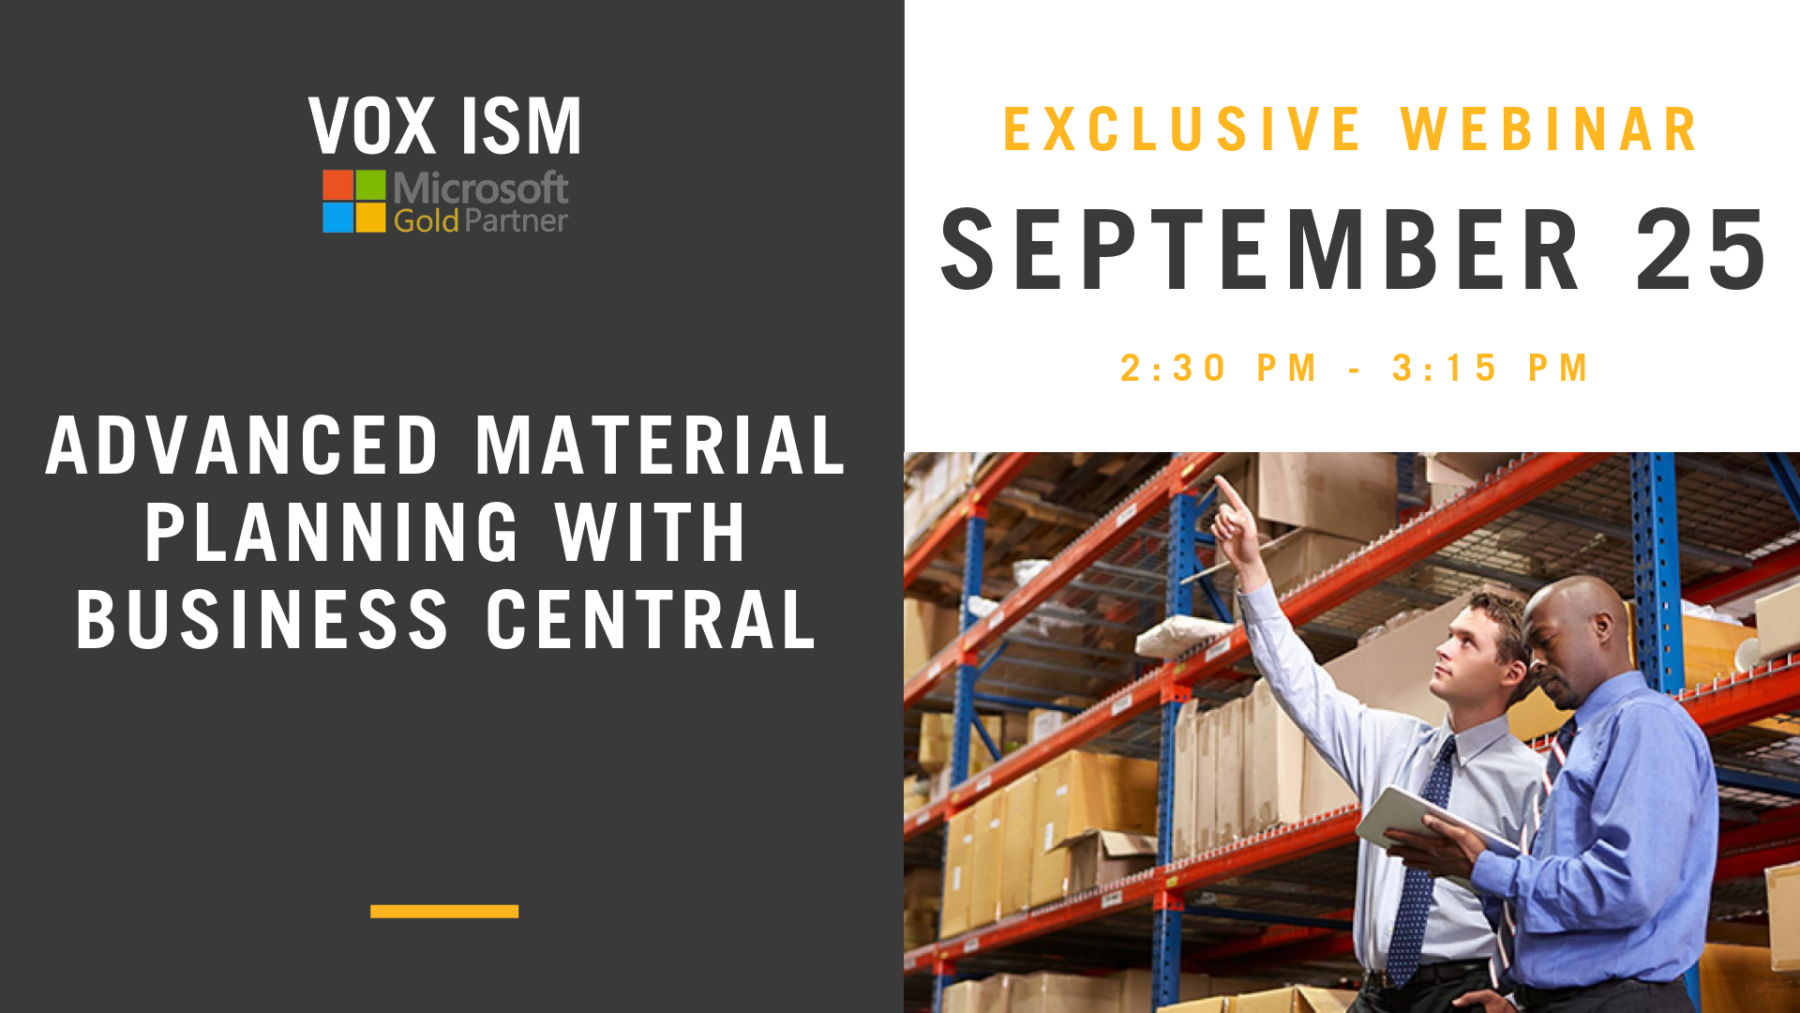 Advanced Material Planning with Business Central - September 25 - Webinar - VOX ISM